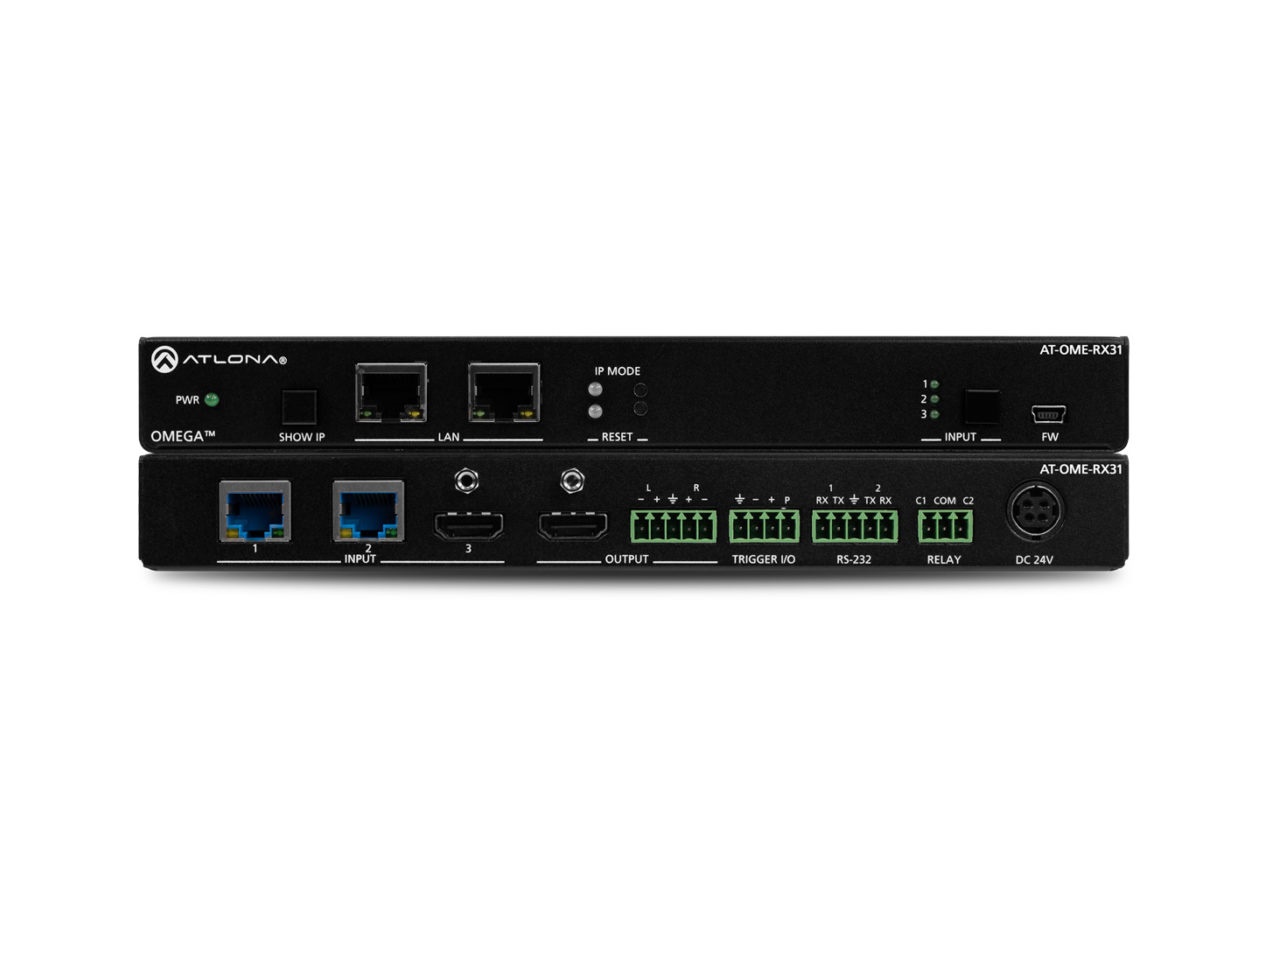 AT-OME-RX31 Omega 4K/UHD Scaler for HDBaseT and HDMI by Atlona